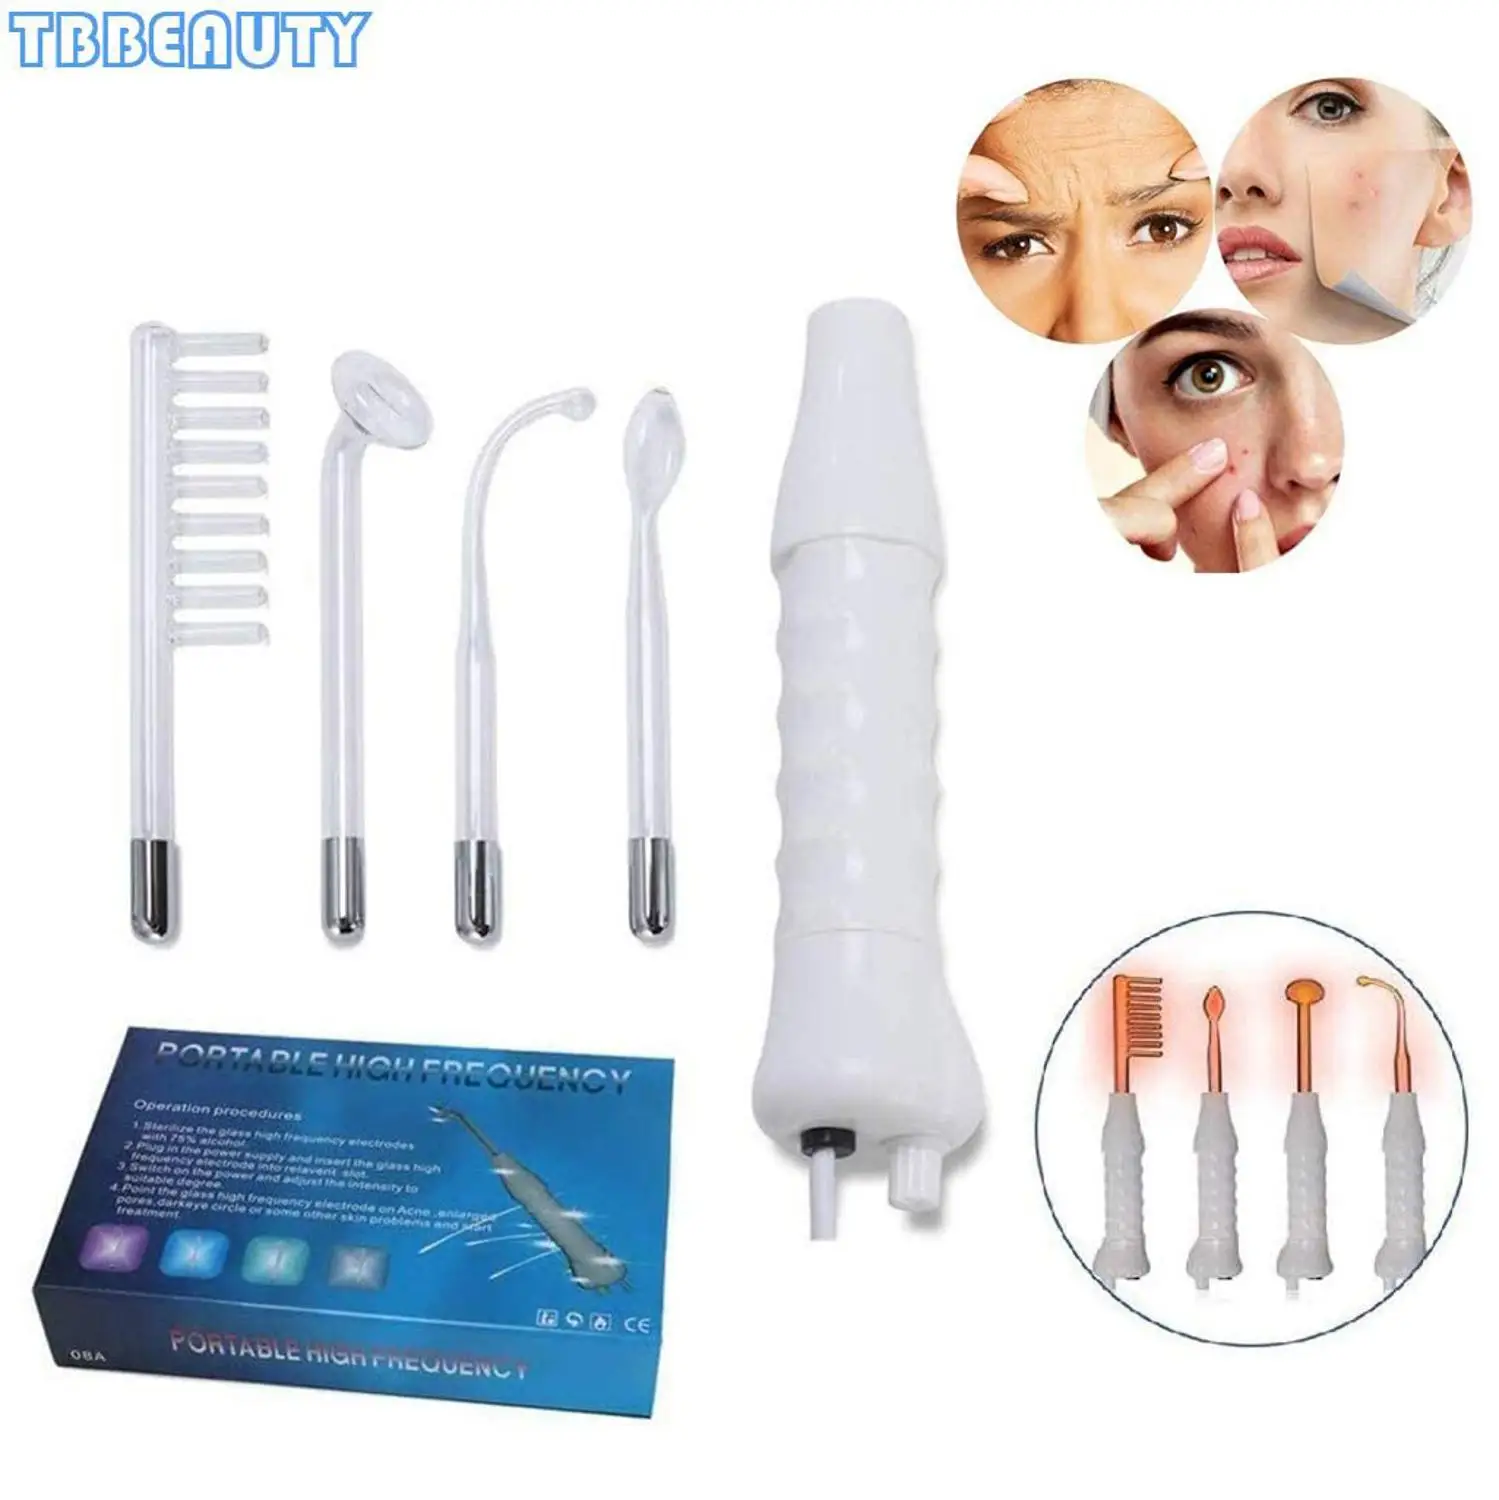 

Handheld 4 in 1 High Frequency Facial Machine Facial Wand Acne Anti Aging Device Skin Tightening Wrinkle Reducing Dark Circles